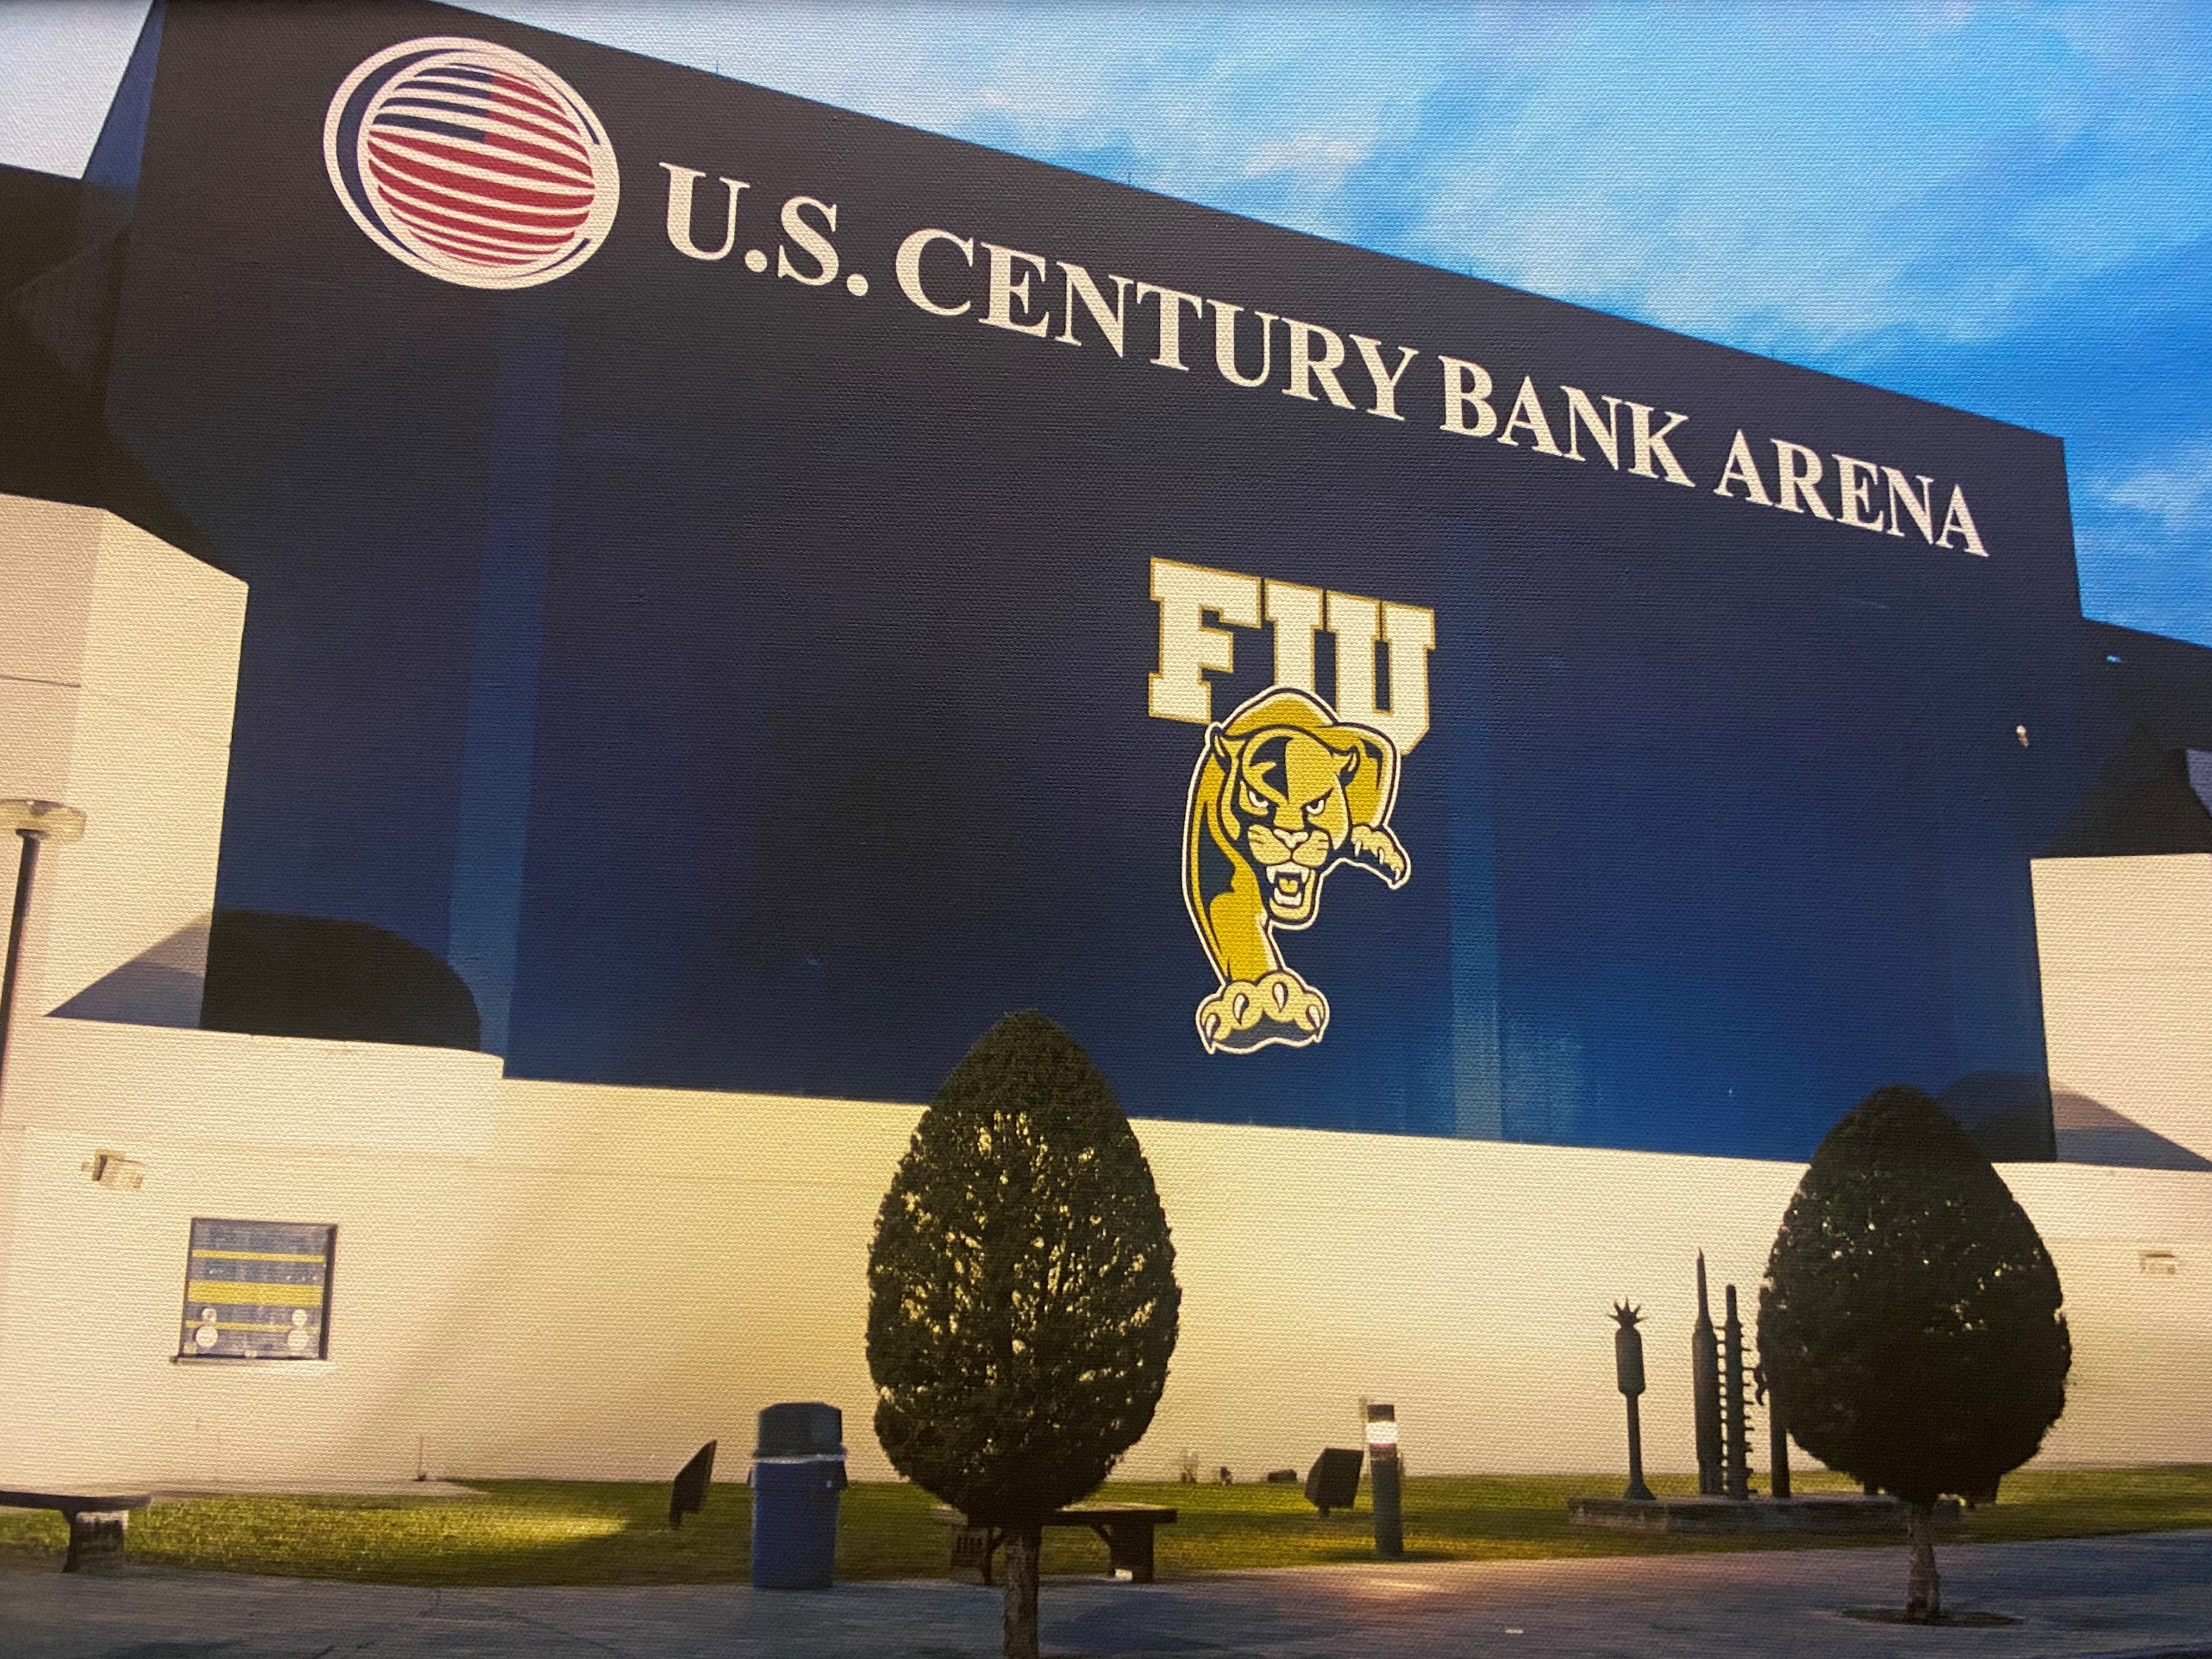 picture of FIU arena with U.S. Century Bank Logo